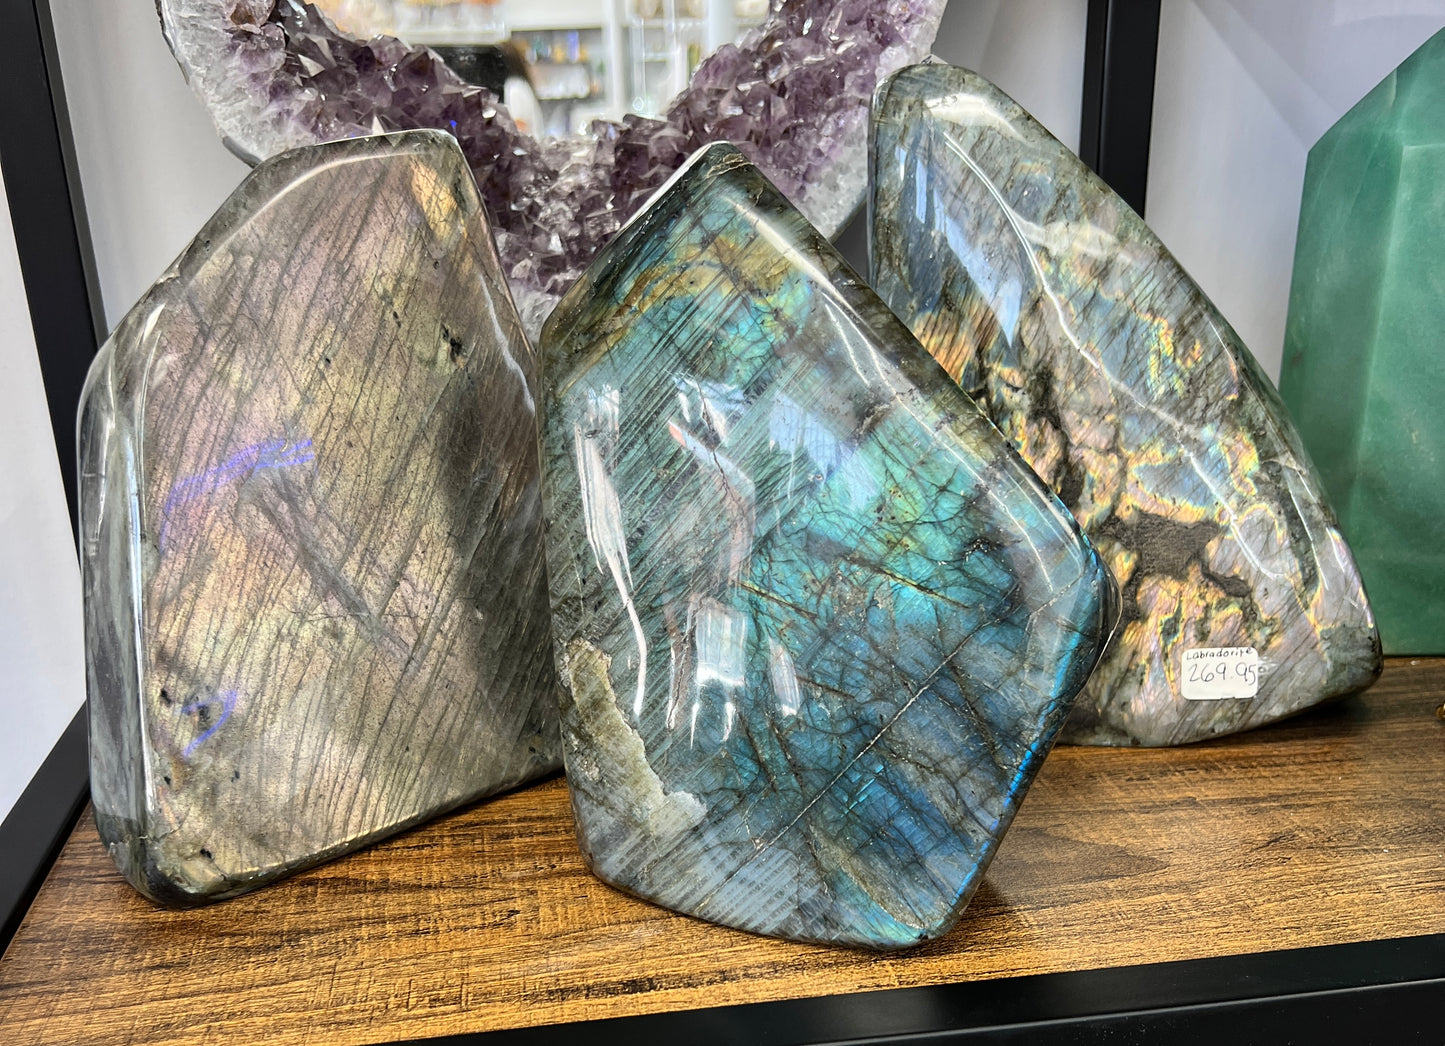 Labradorite featured on our Social Media